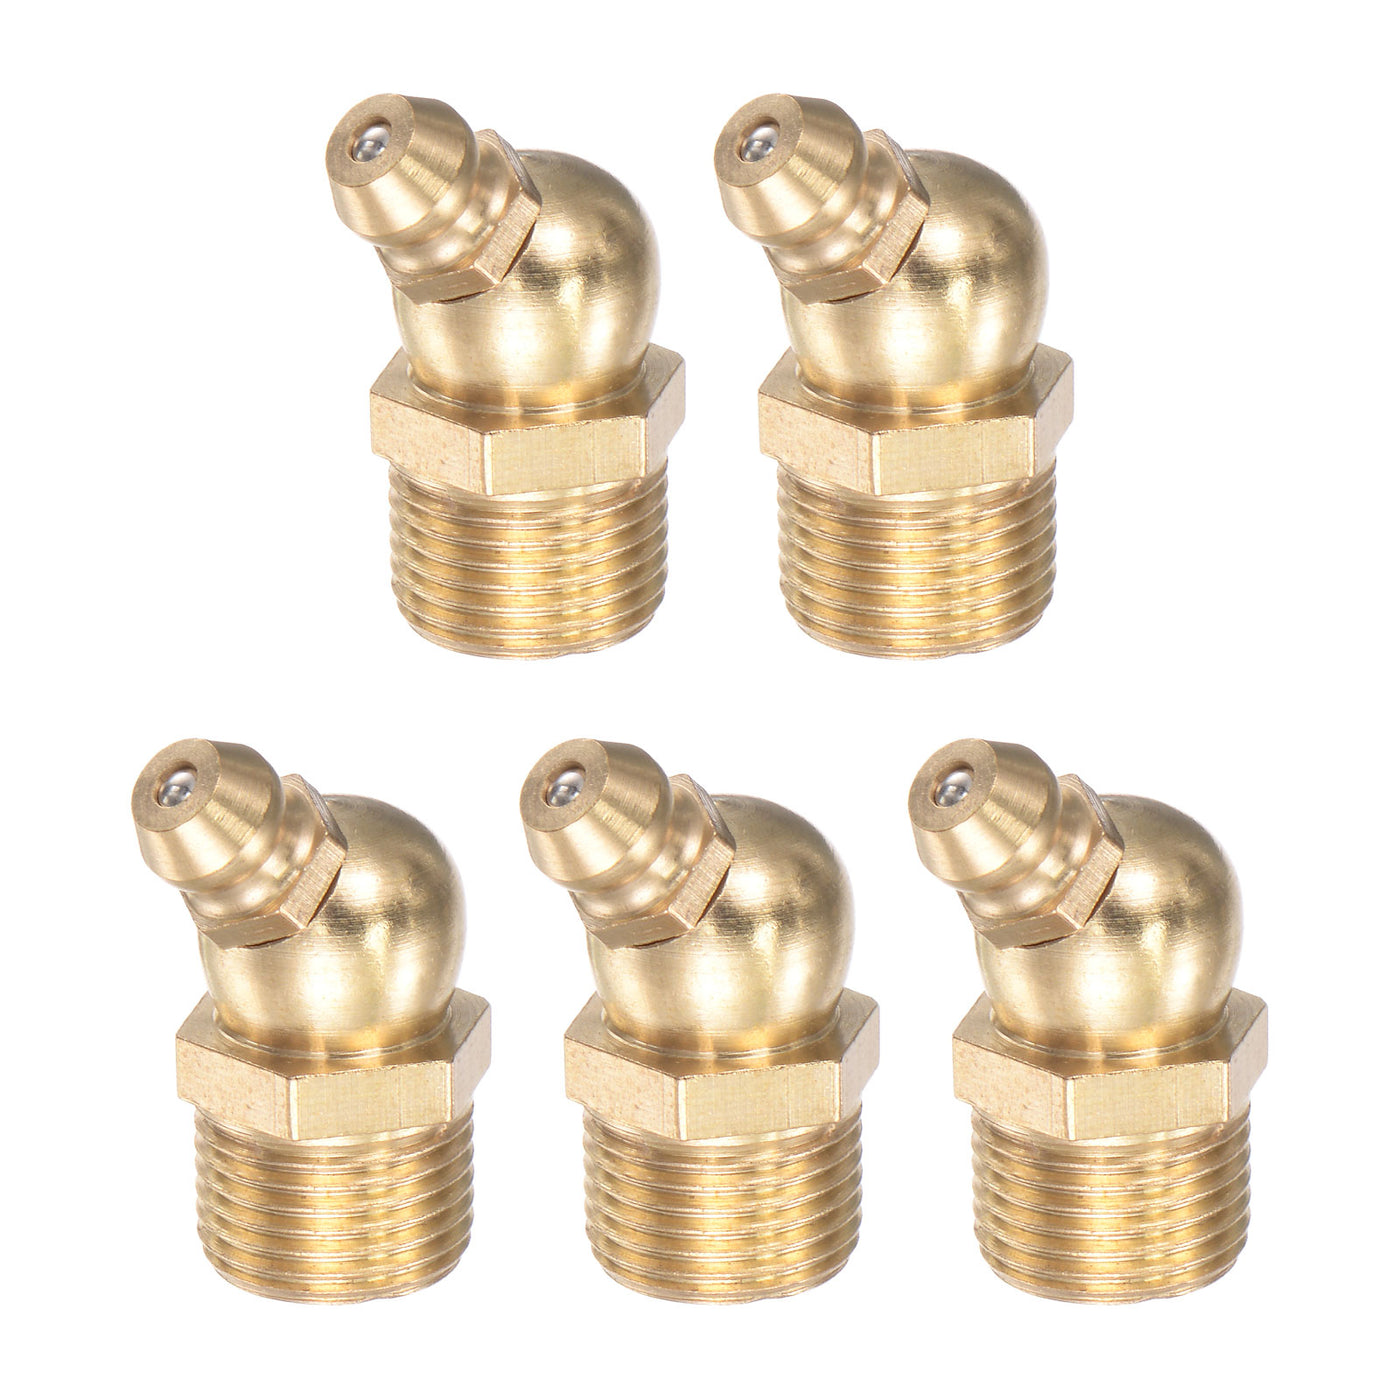 Uxcell Uxcell Brass 45 Degree Hydraulic Grease Fitting M12 x 1mm Thread, 5Pcs